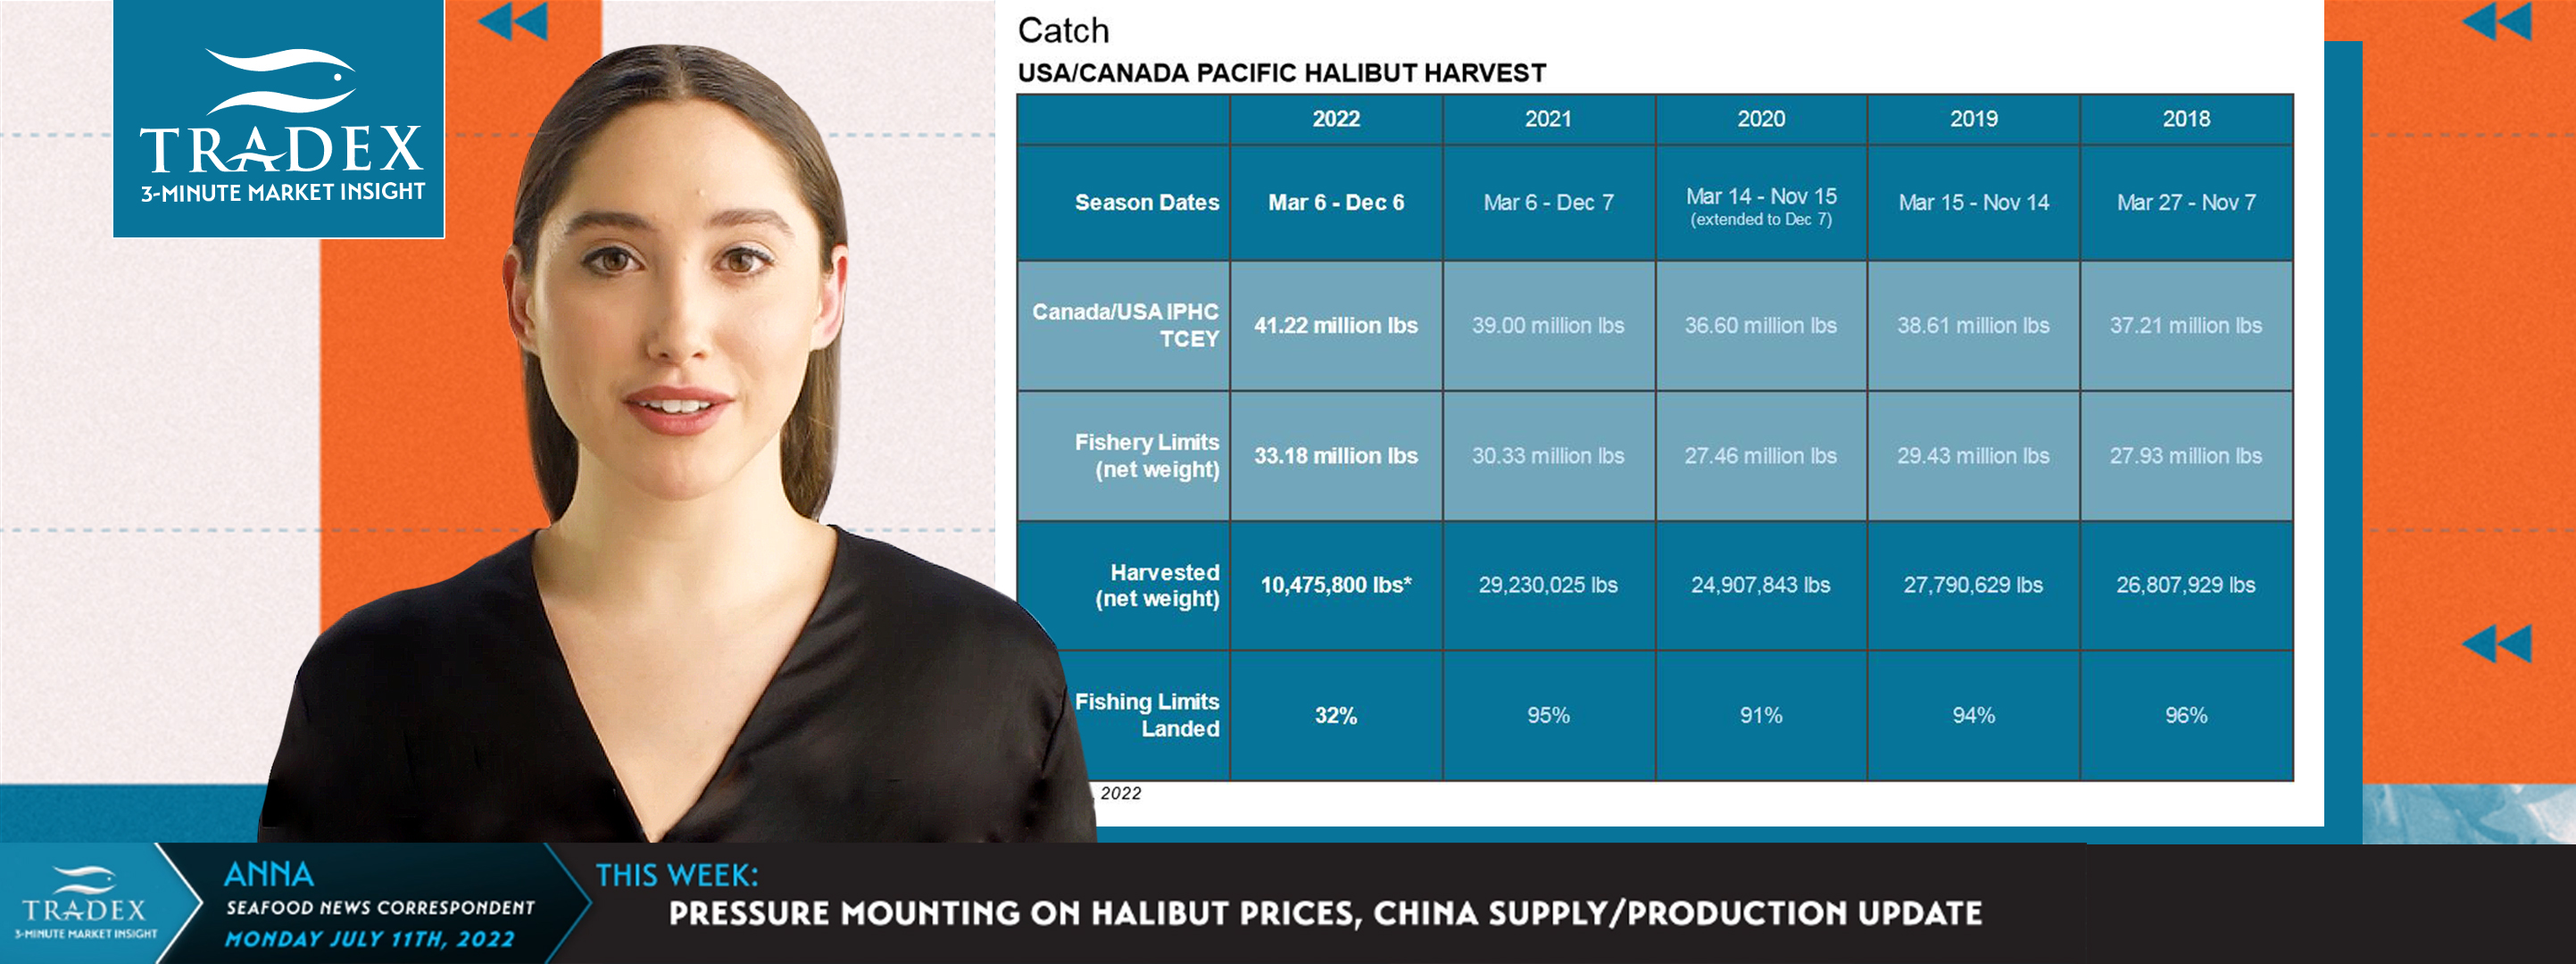 Pacific Halibut and China Update